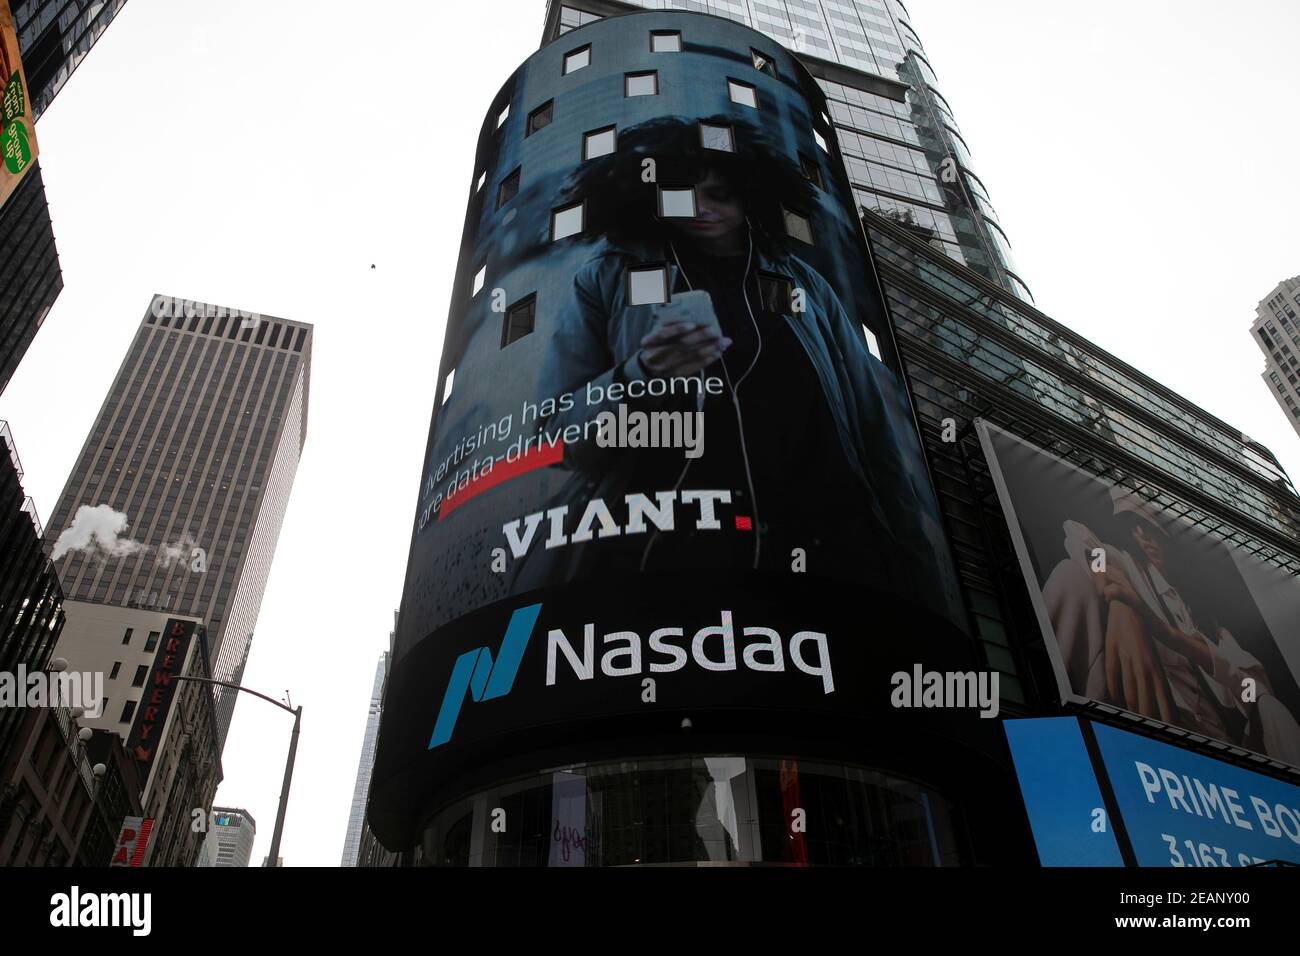 The logo of Viant Technology Inc. (DSP) is pictured on the display outside the Nasdaq MarketSite in Times Square during the company's IPO in New York City, New York, U.S., February 10, 2021. REUTERS/Mike Segar Stock Photo